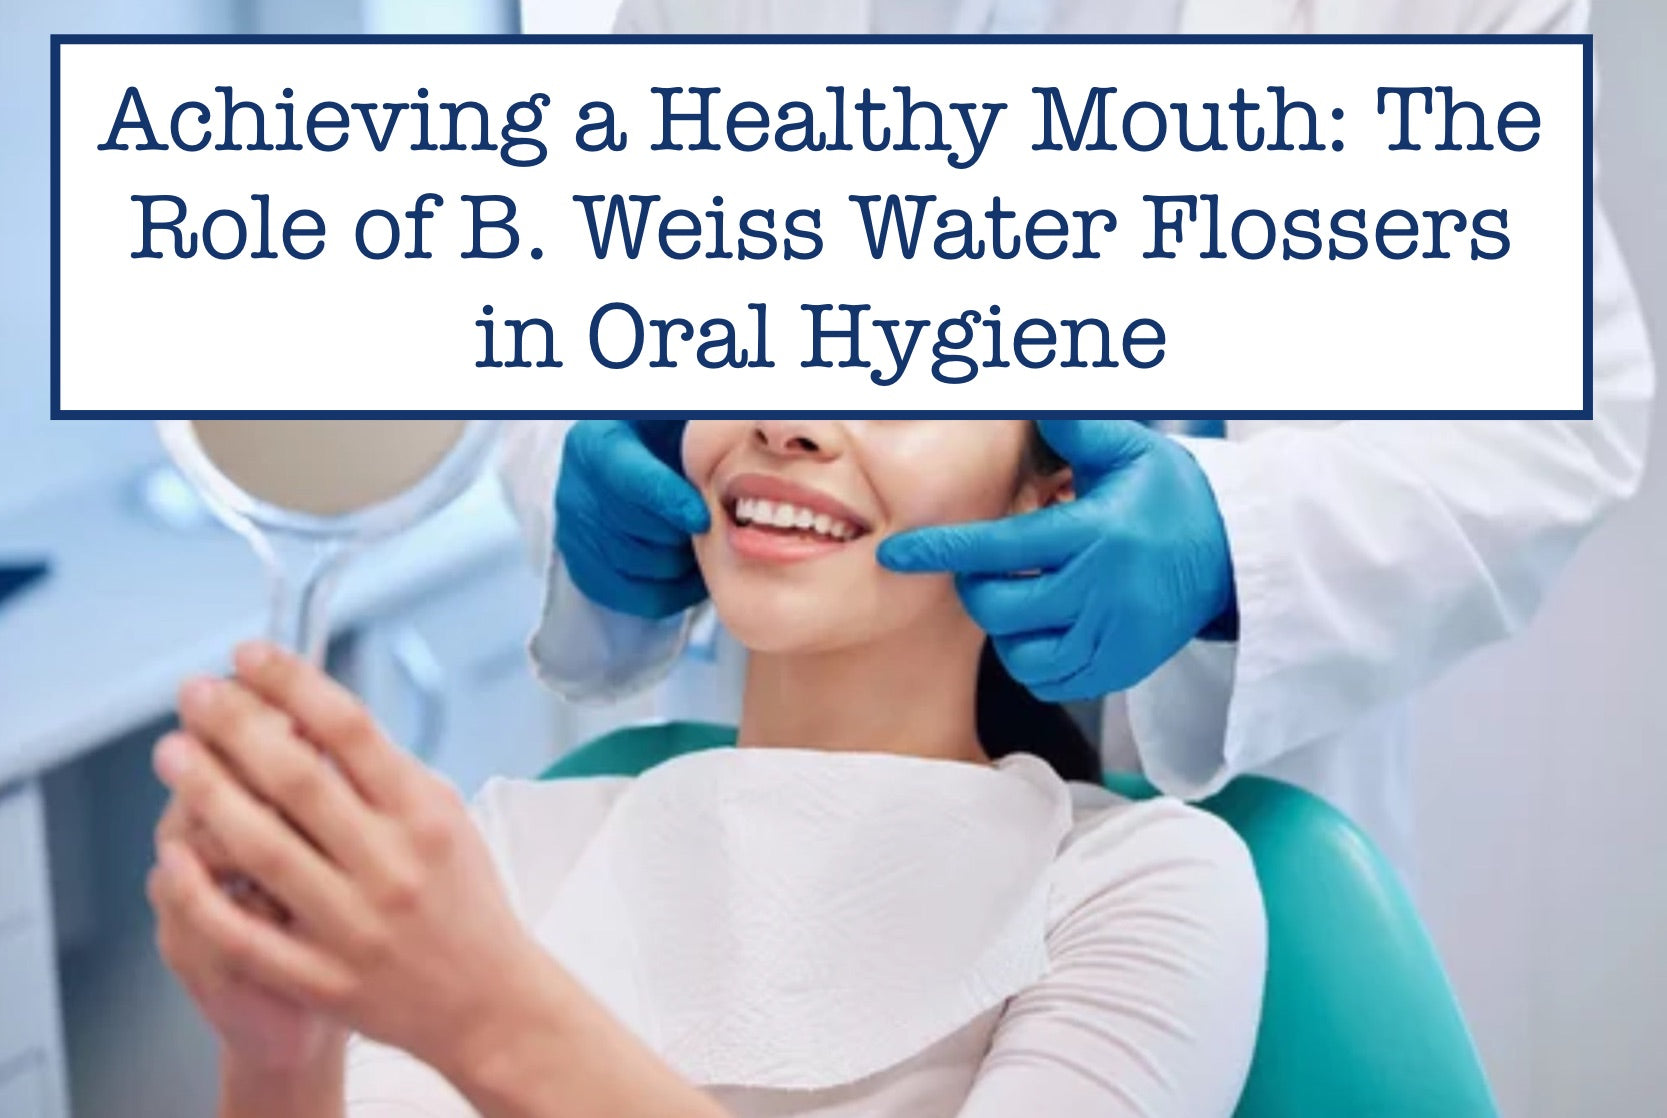 Achieving a Healthy Mouth: The Role of B. Weiss Water Flossers in Oral Hygiene